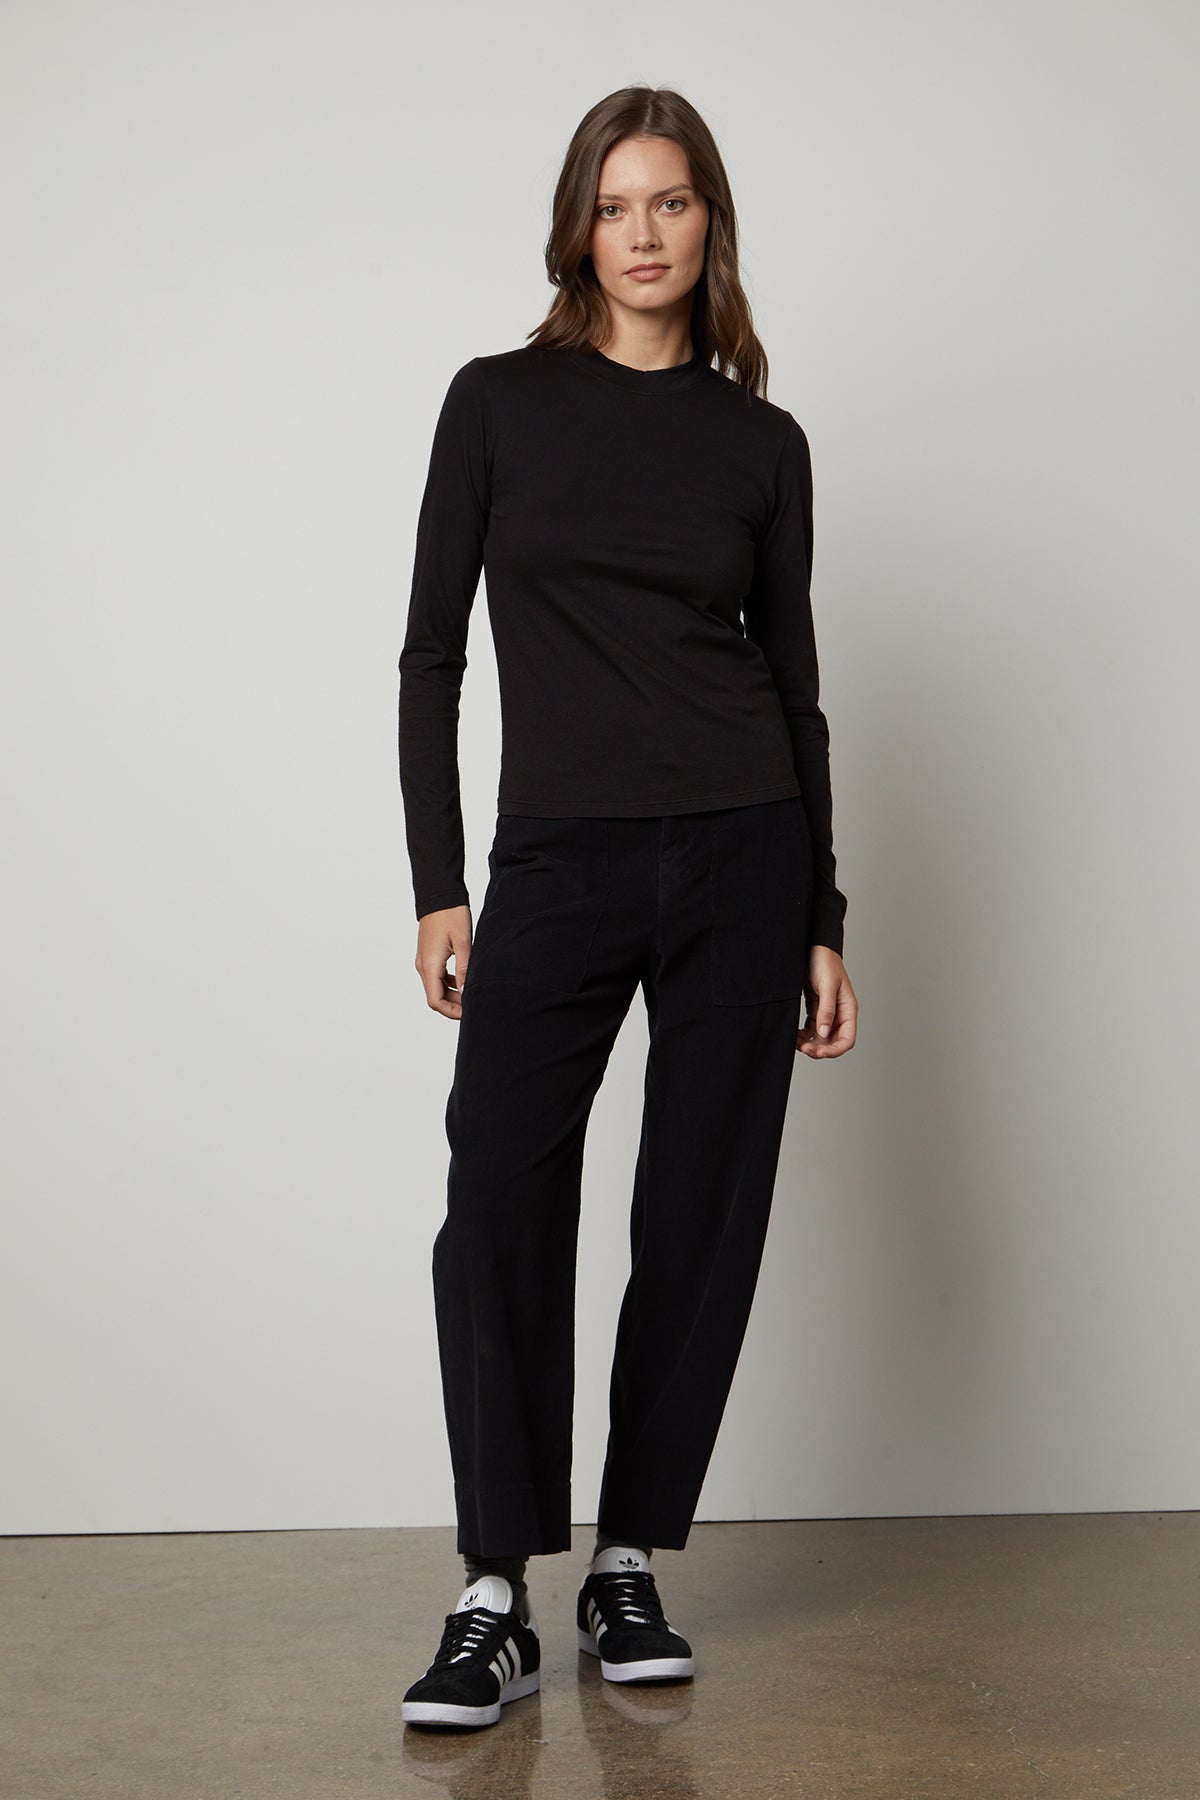 DELIAH SUEDED JERSEY CROPPED HENLEY – Velvet by Graham & Spencer